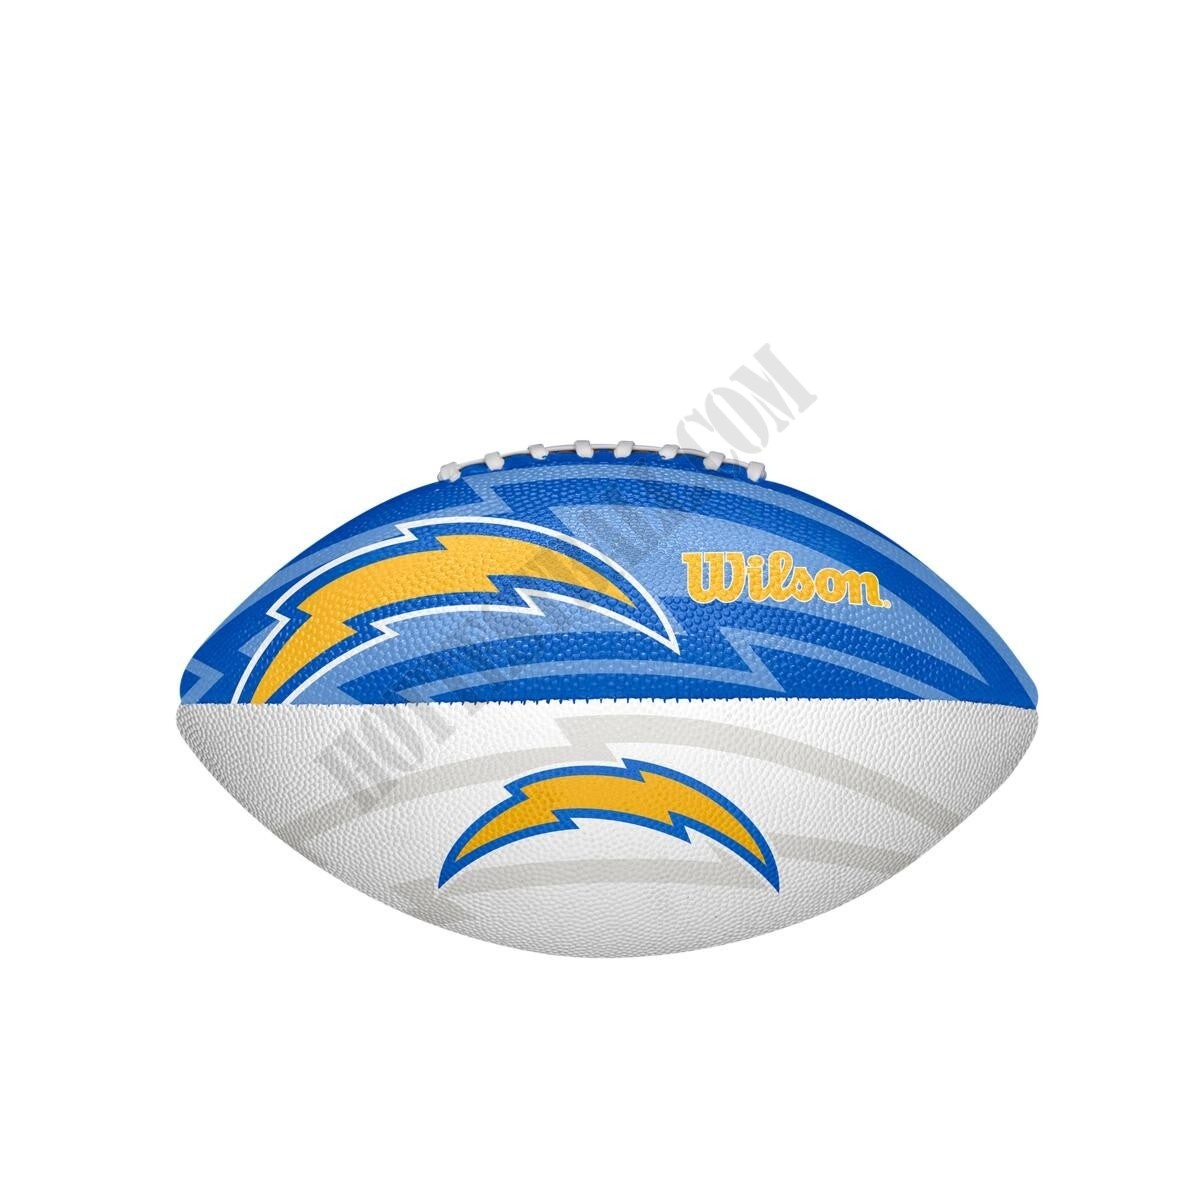 NFL Team Tailgate Football - Los Angeles Chargers ● Wilson Promotions - -2